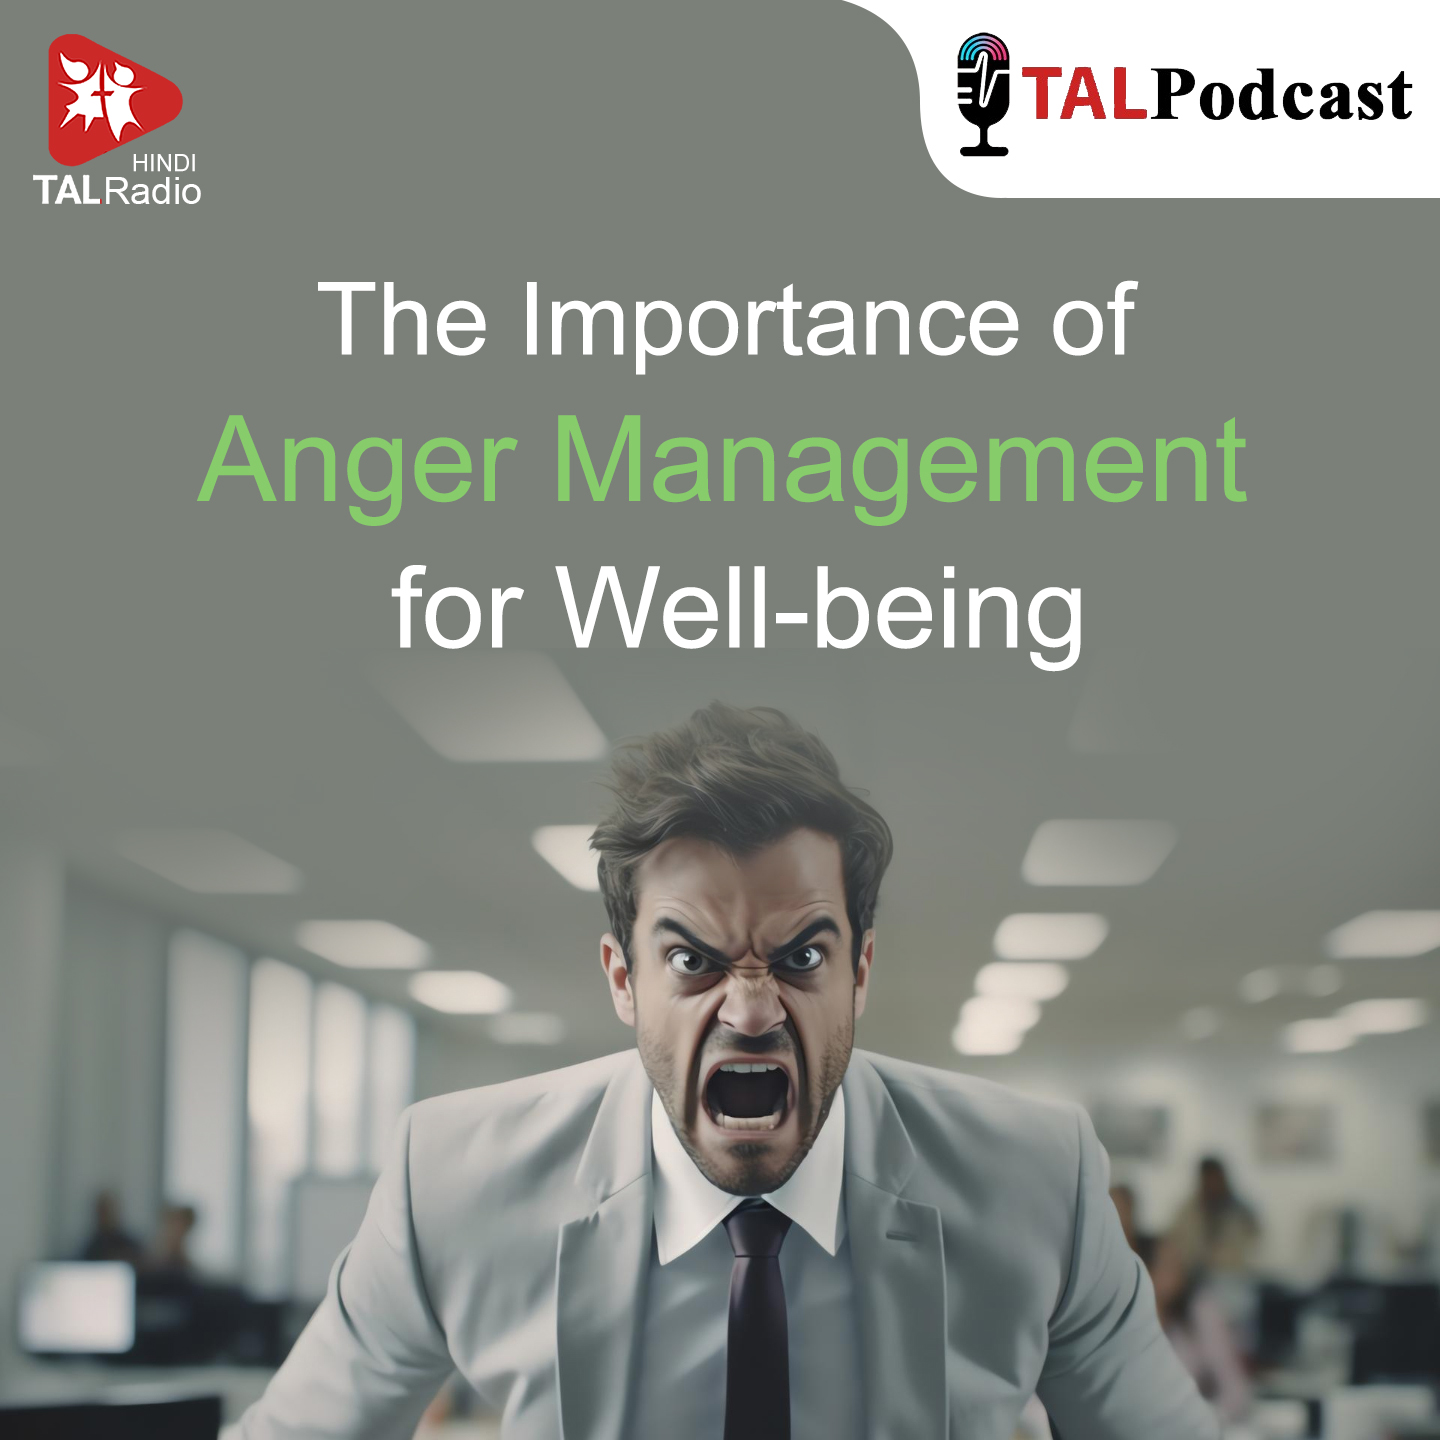 The Importance of Anger Management for Well-being